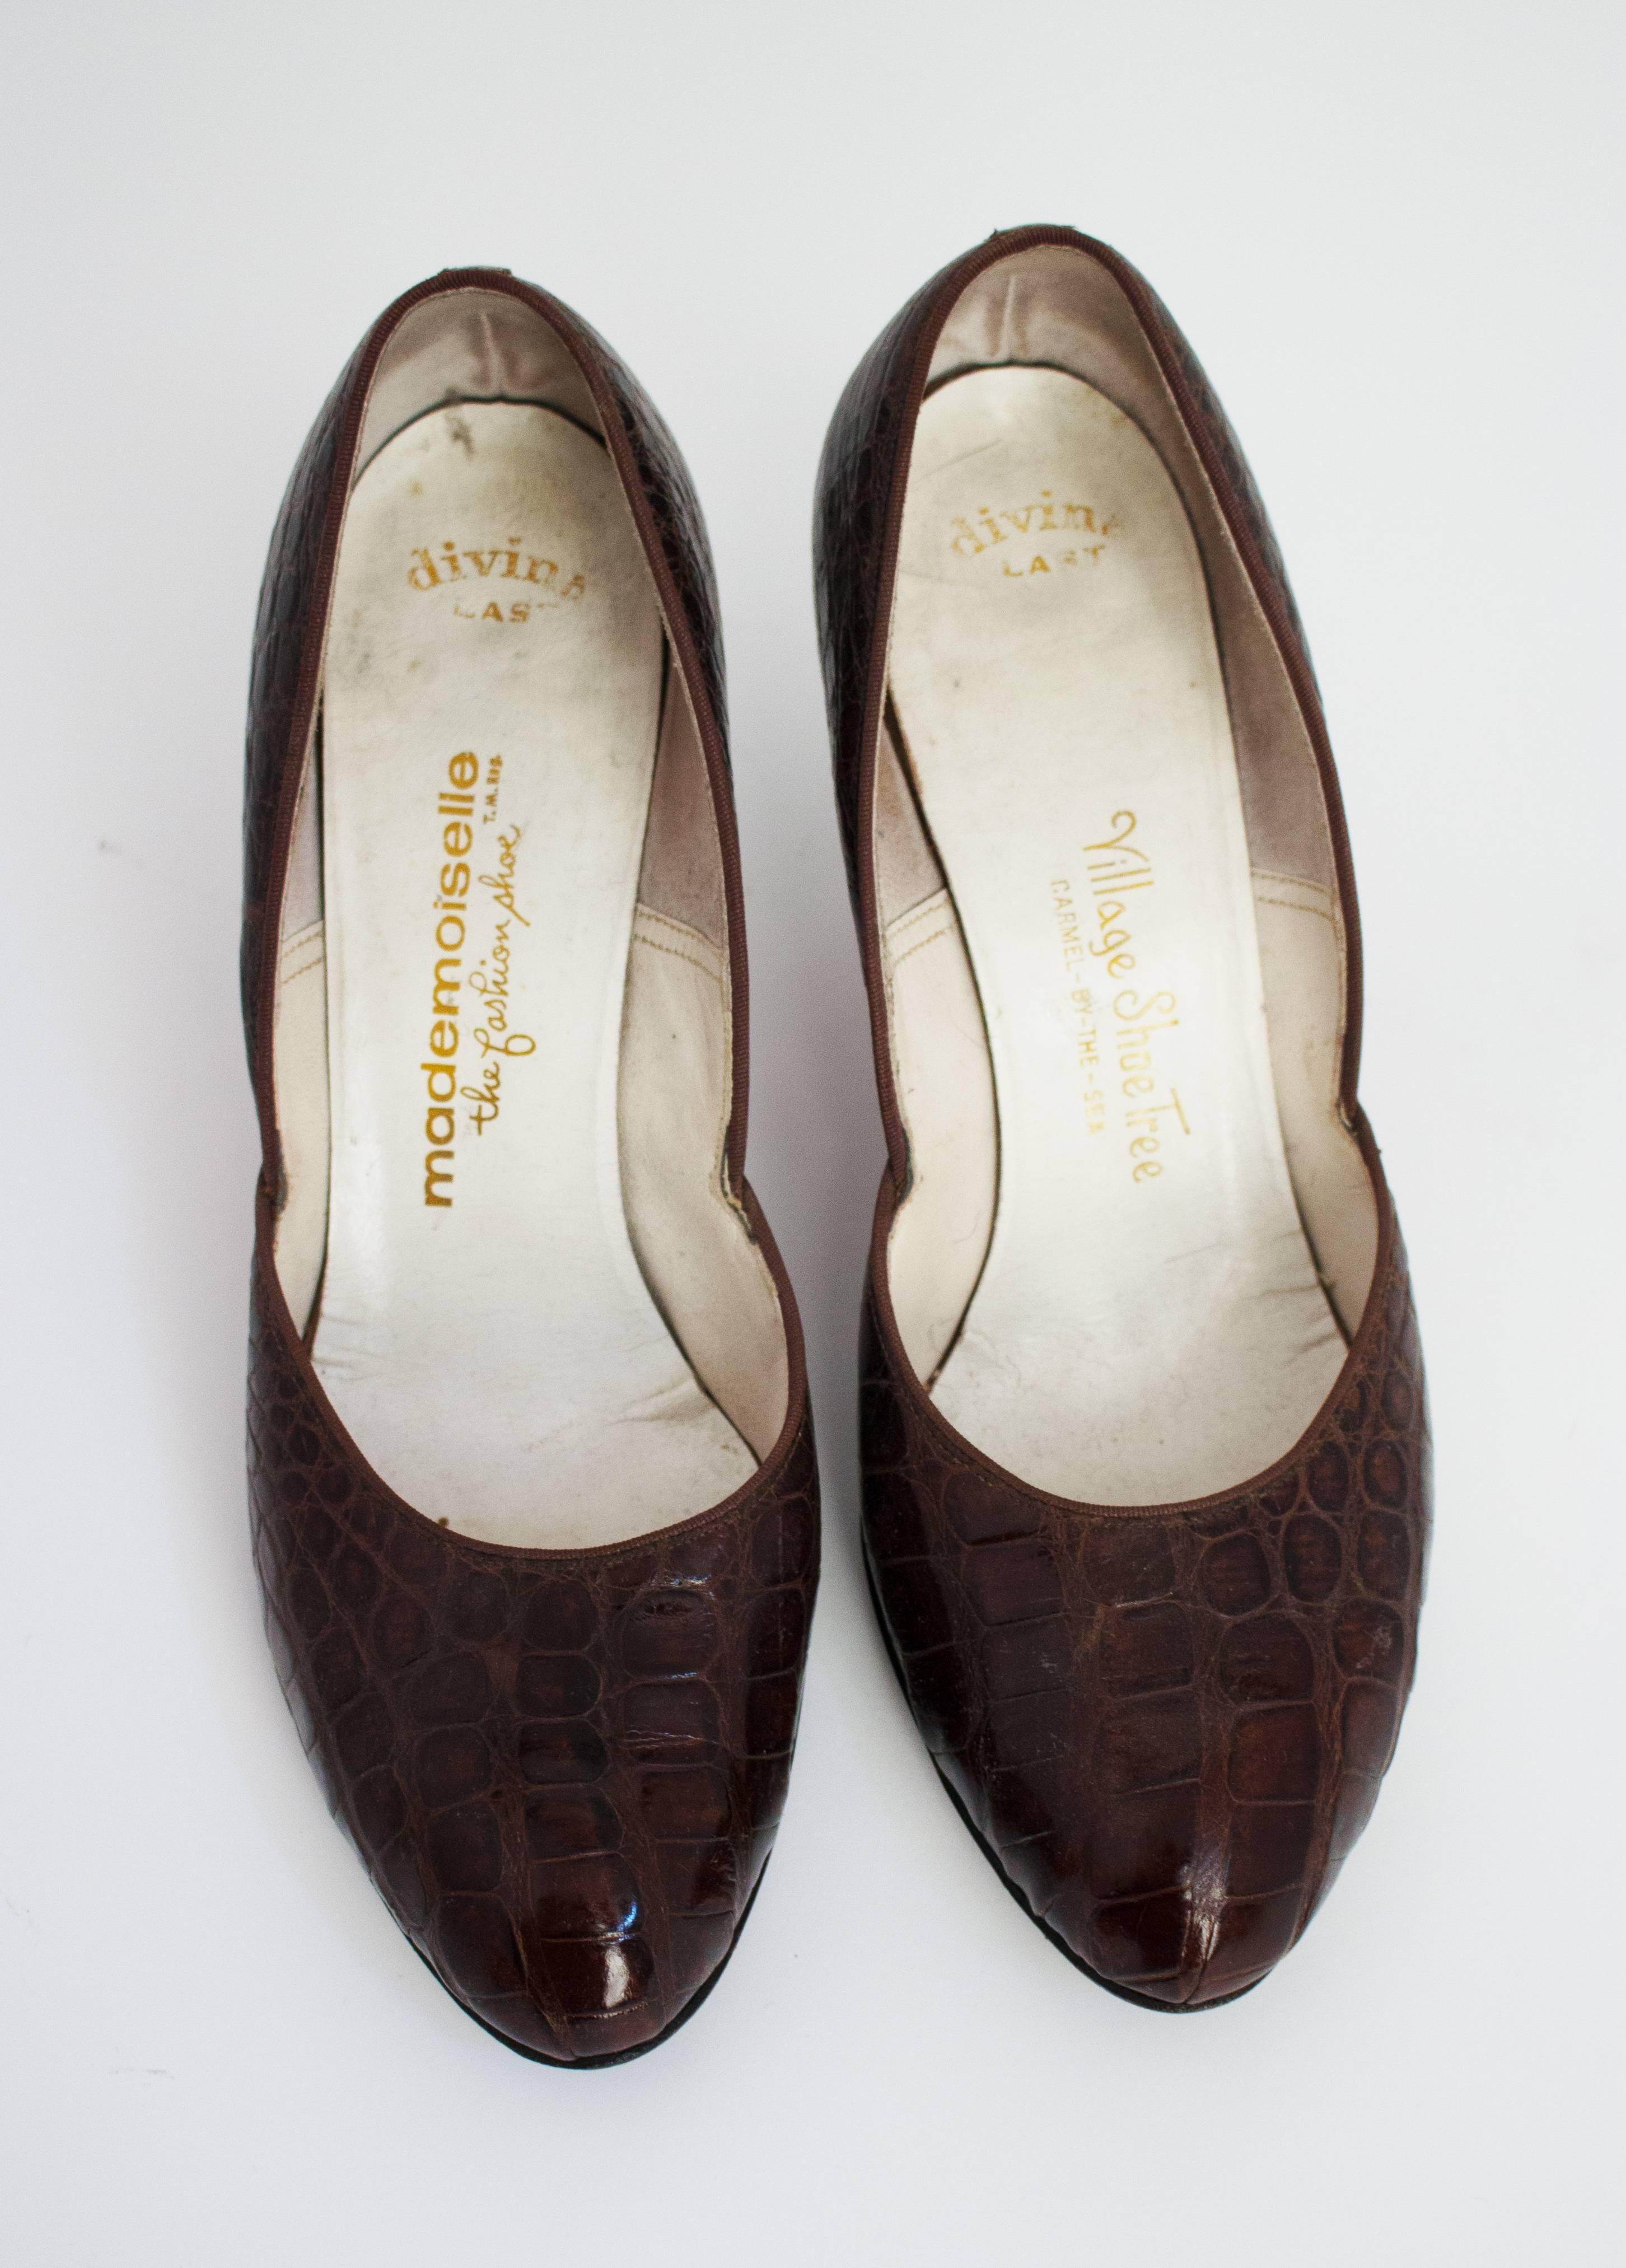 1940s alligator pumps. Leather sole. US 7 A.

Palm of foot: 2 7/8"
Insole: 9 1/2"
Heel: 2 1/2"